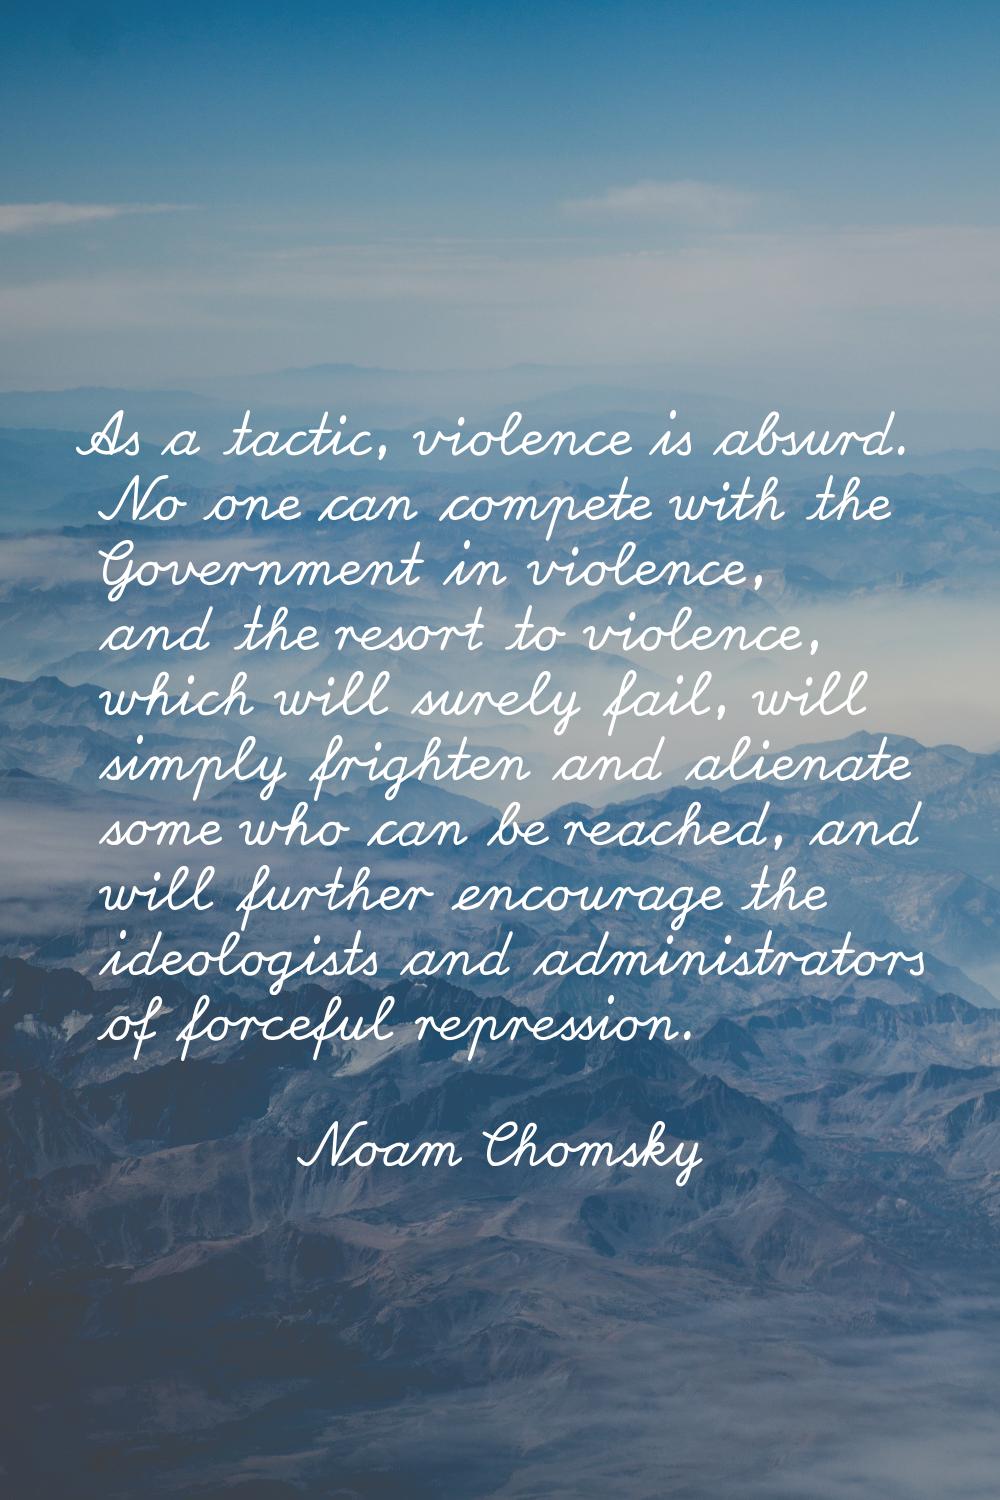 As a tactic, violence is absurd. No one can compete with the Government in violence, and the resort